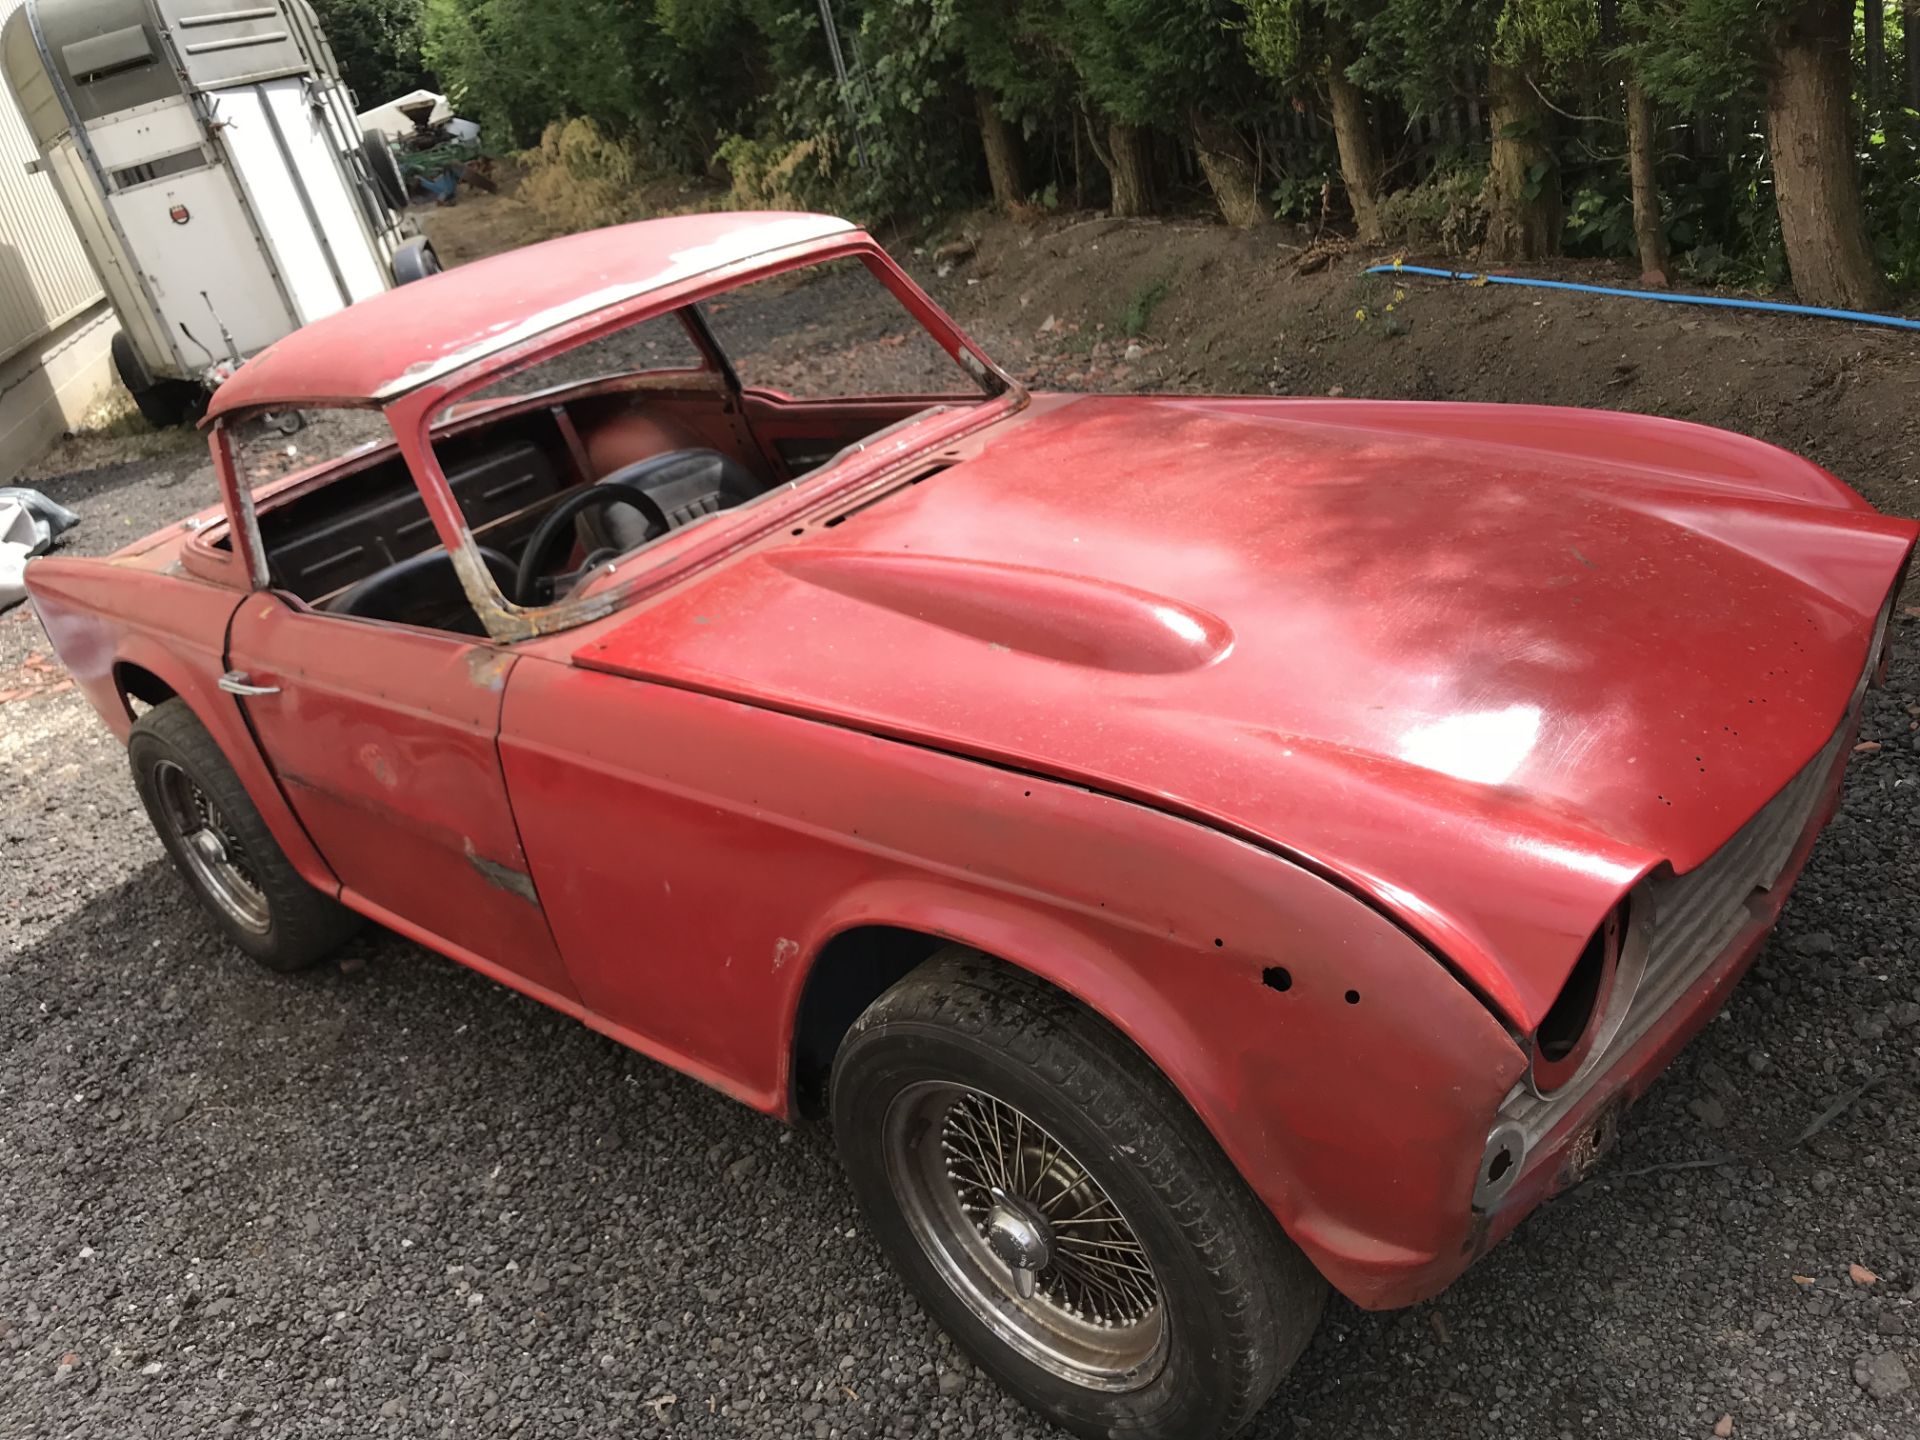 Triumph TR4 with Optional Hardtop - Image 49 of 64